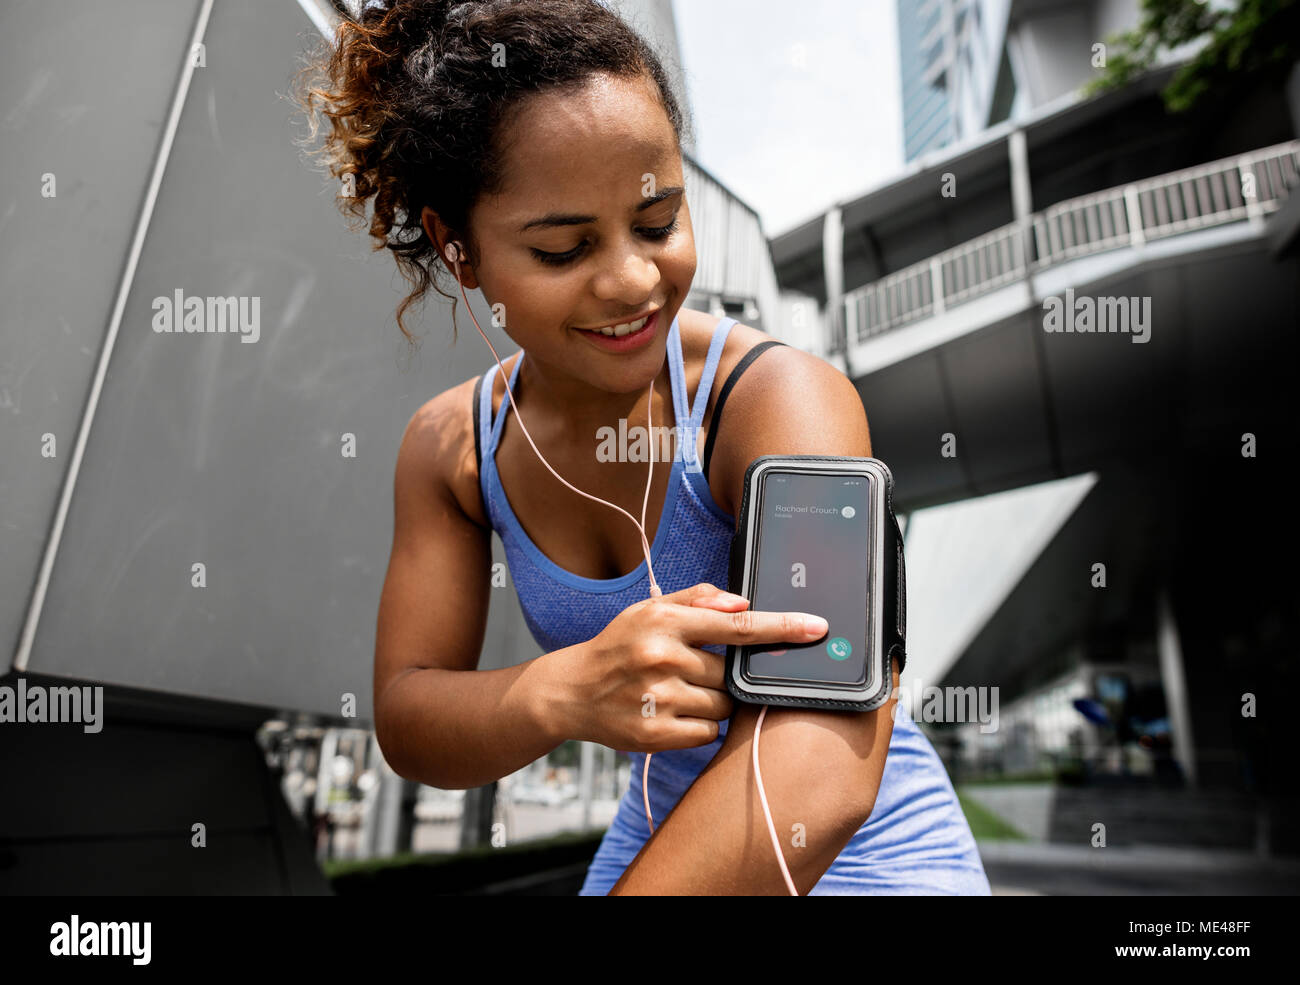 Healthy woman exercising while using technology Stock Photo